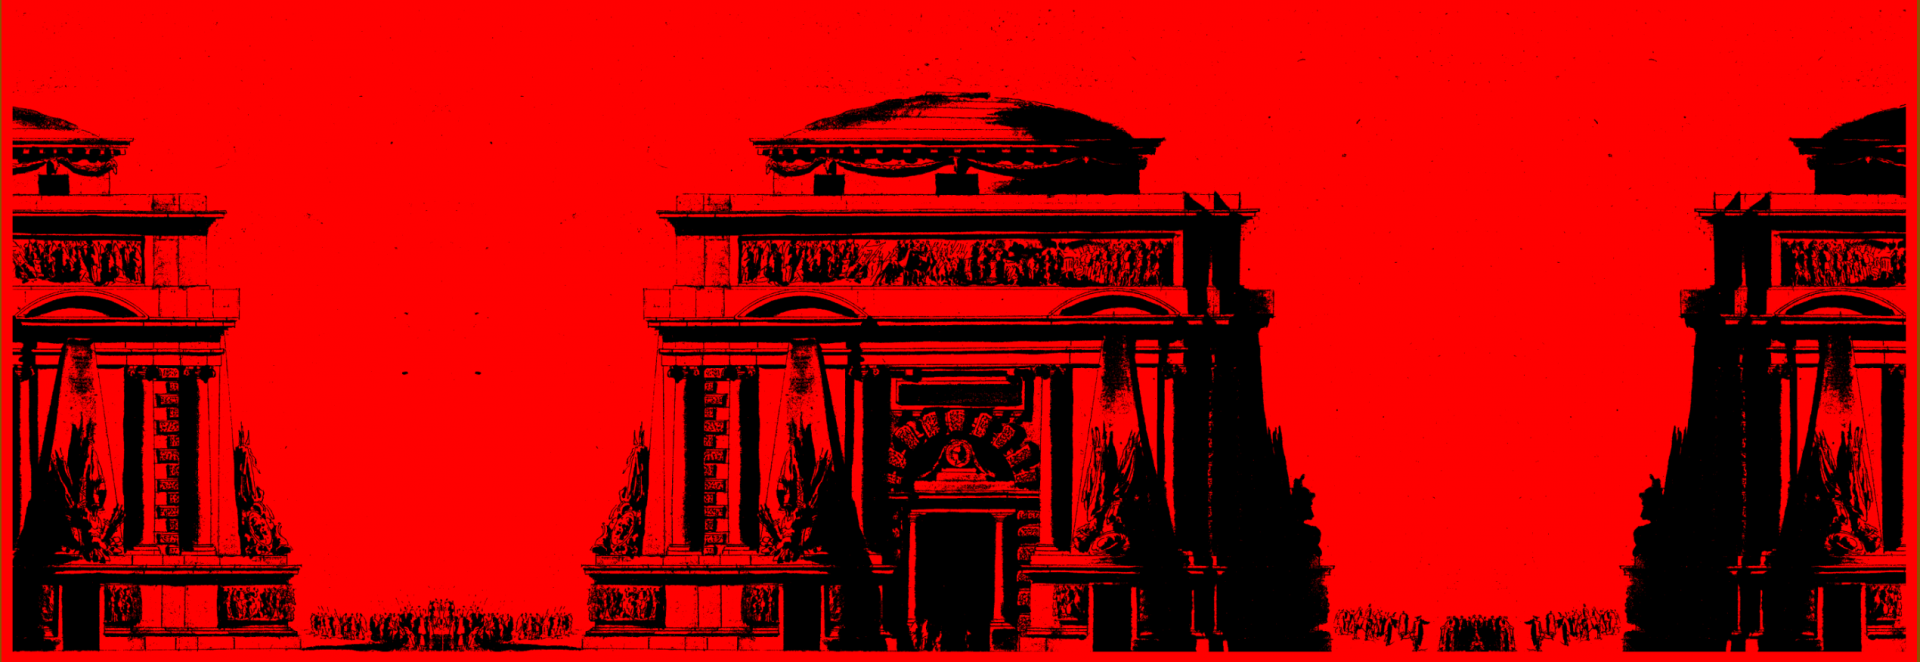 A black-and-white drawing of an ornate mausoleum on a red background